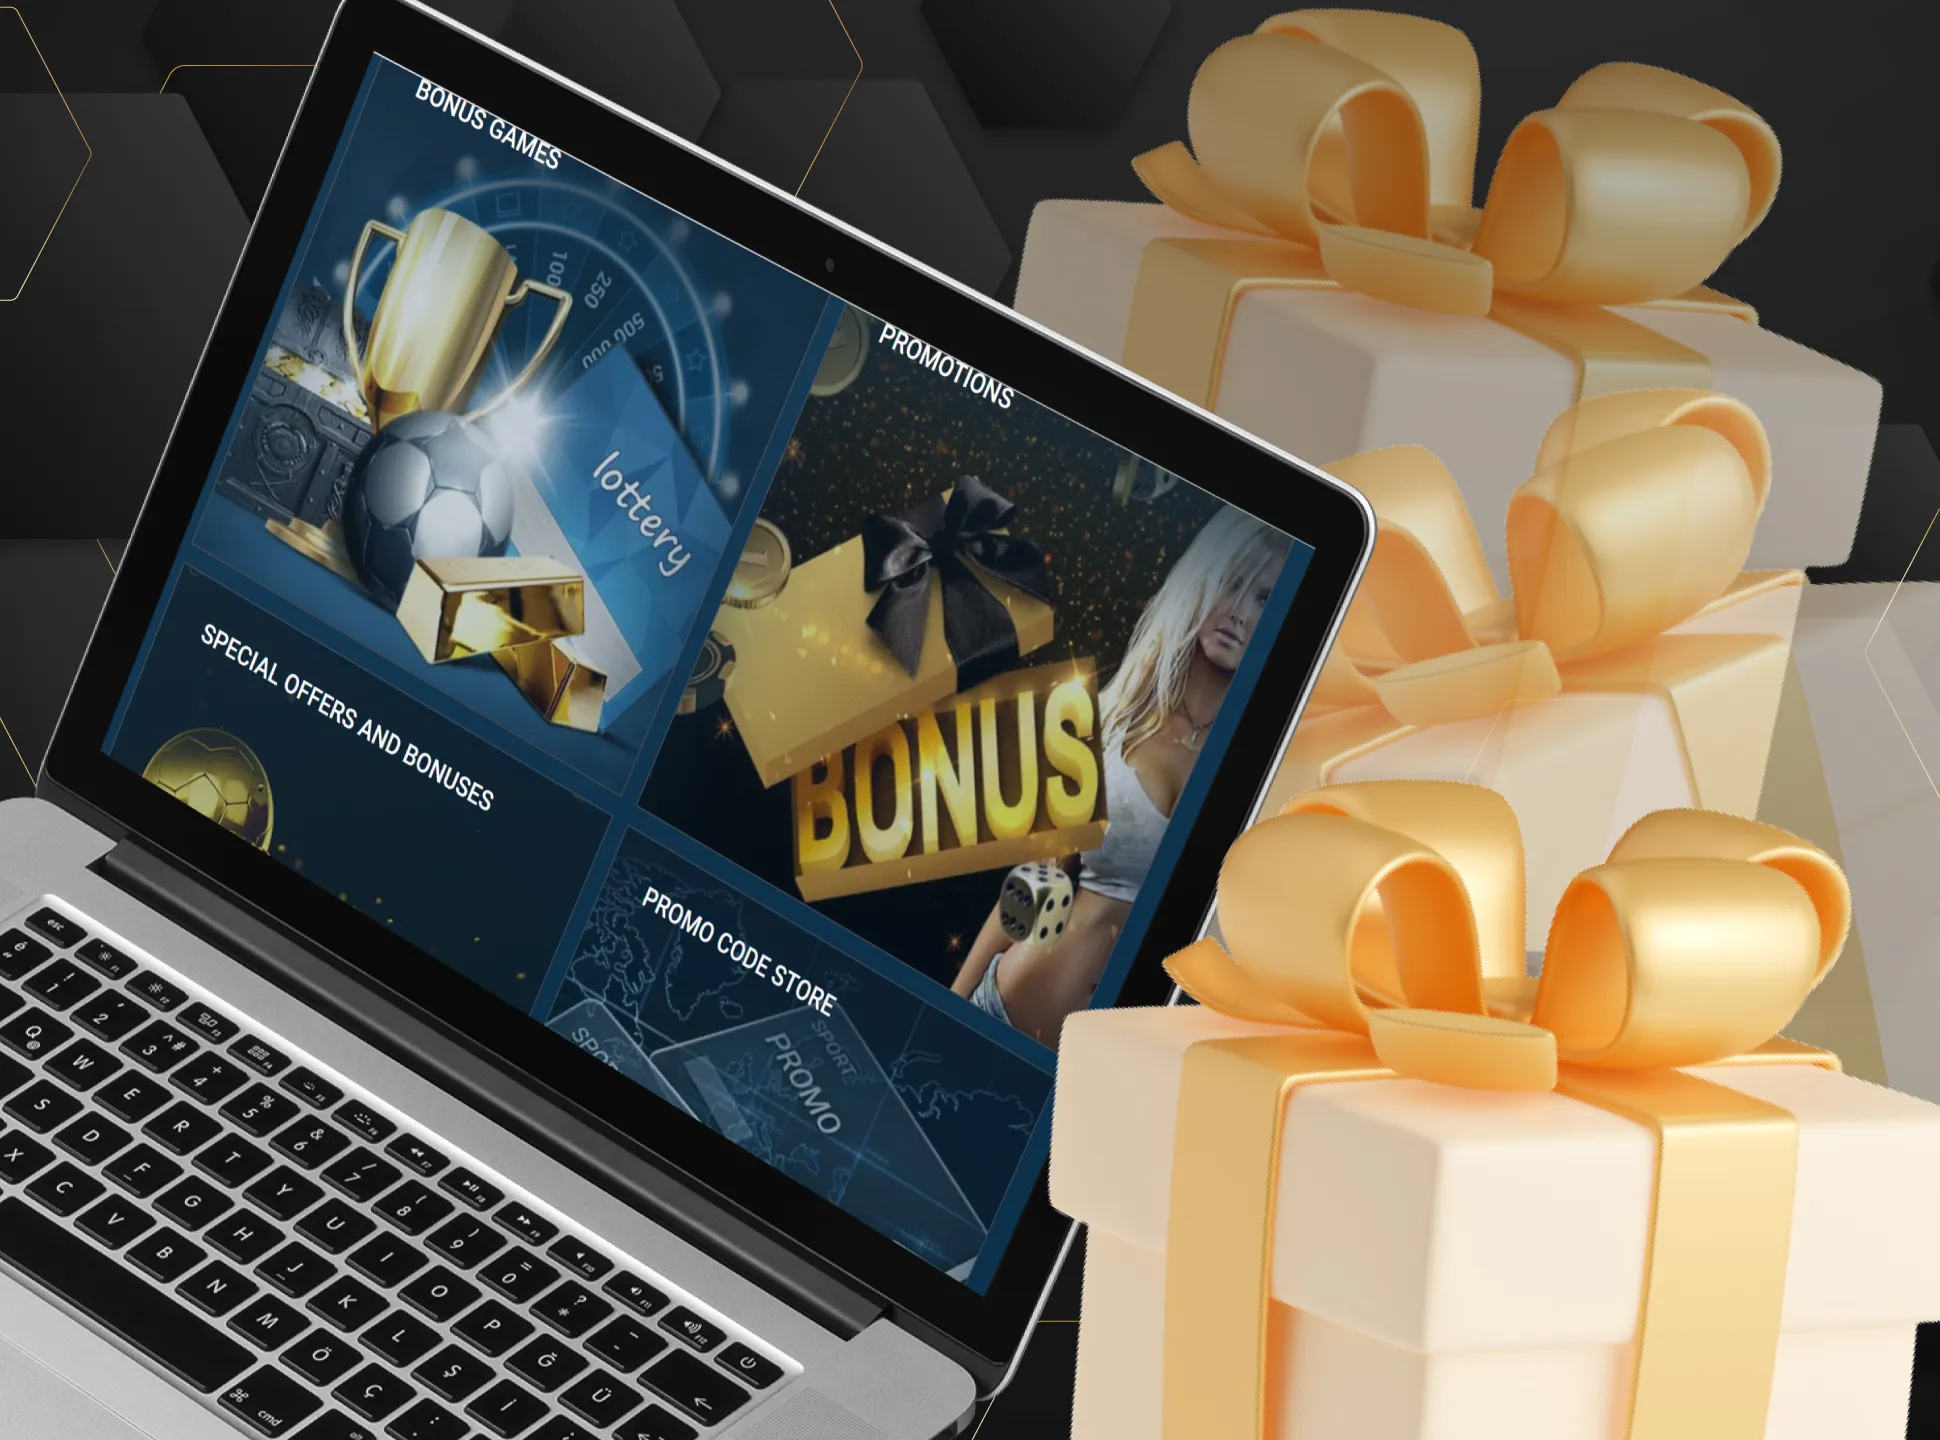 Bonuses and promotions attract more users.